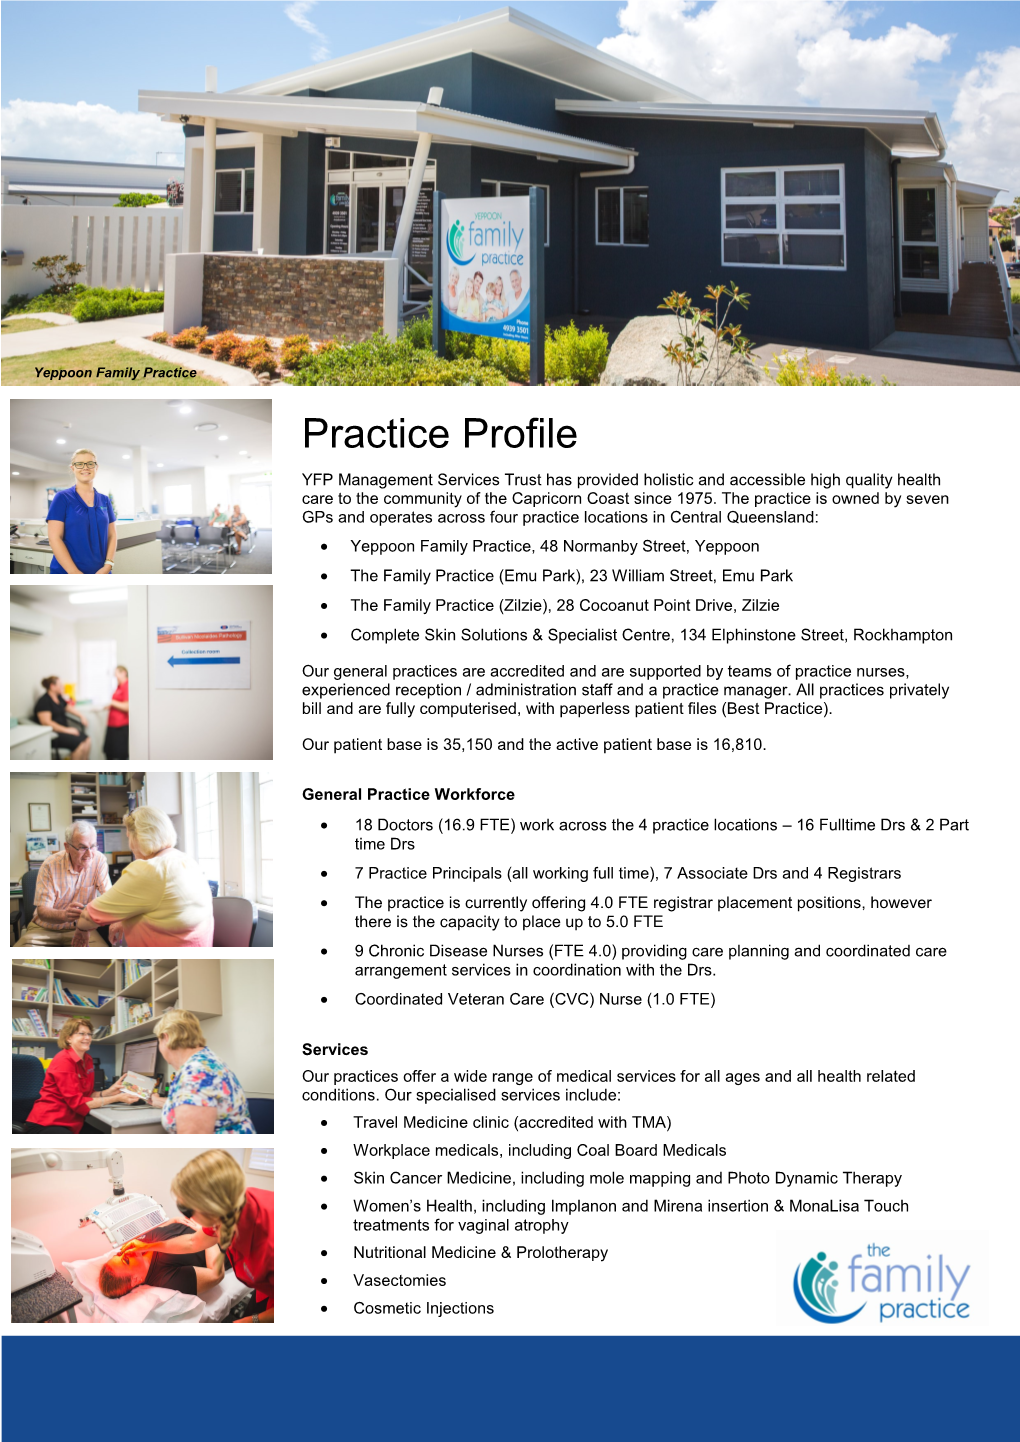 Practice Profile YFP Management Services Trust Has Provided Holistic and Accessible High Quality Health Care to the Community of the Capricorn Coast Since 1975